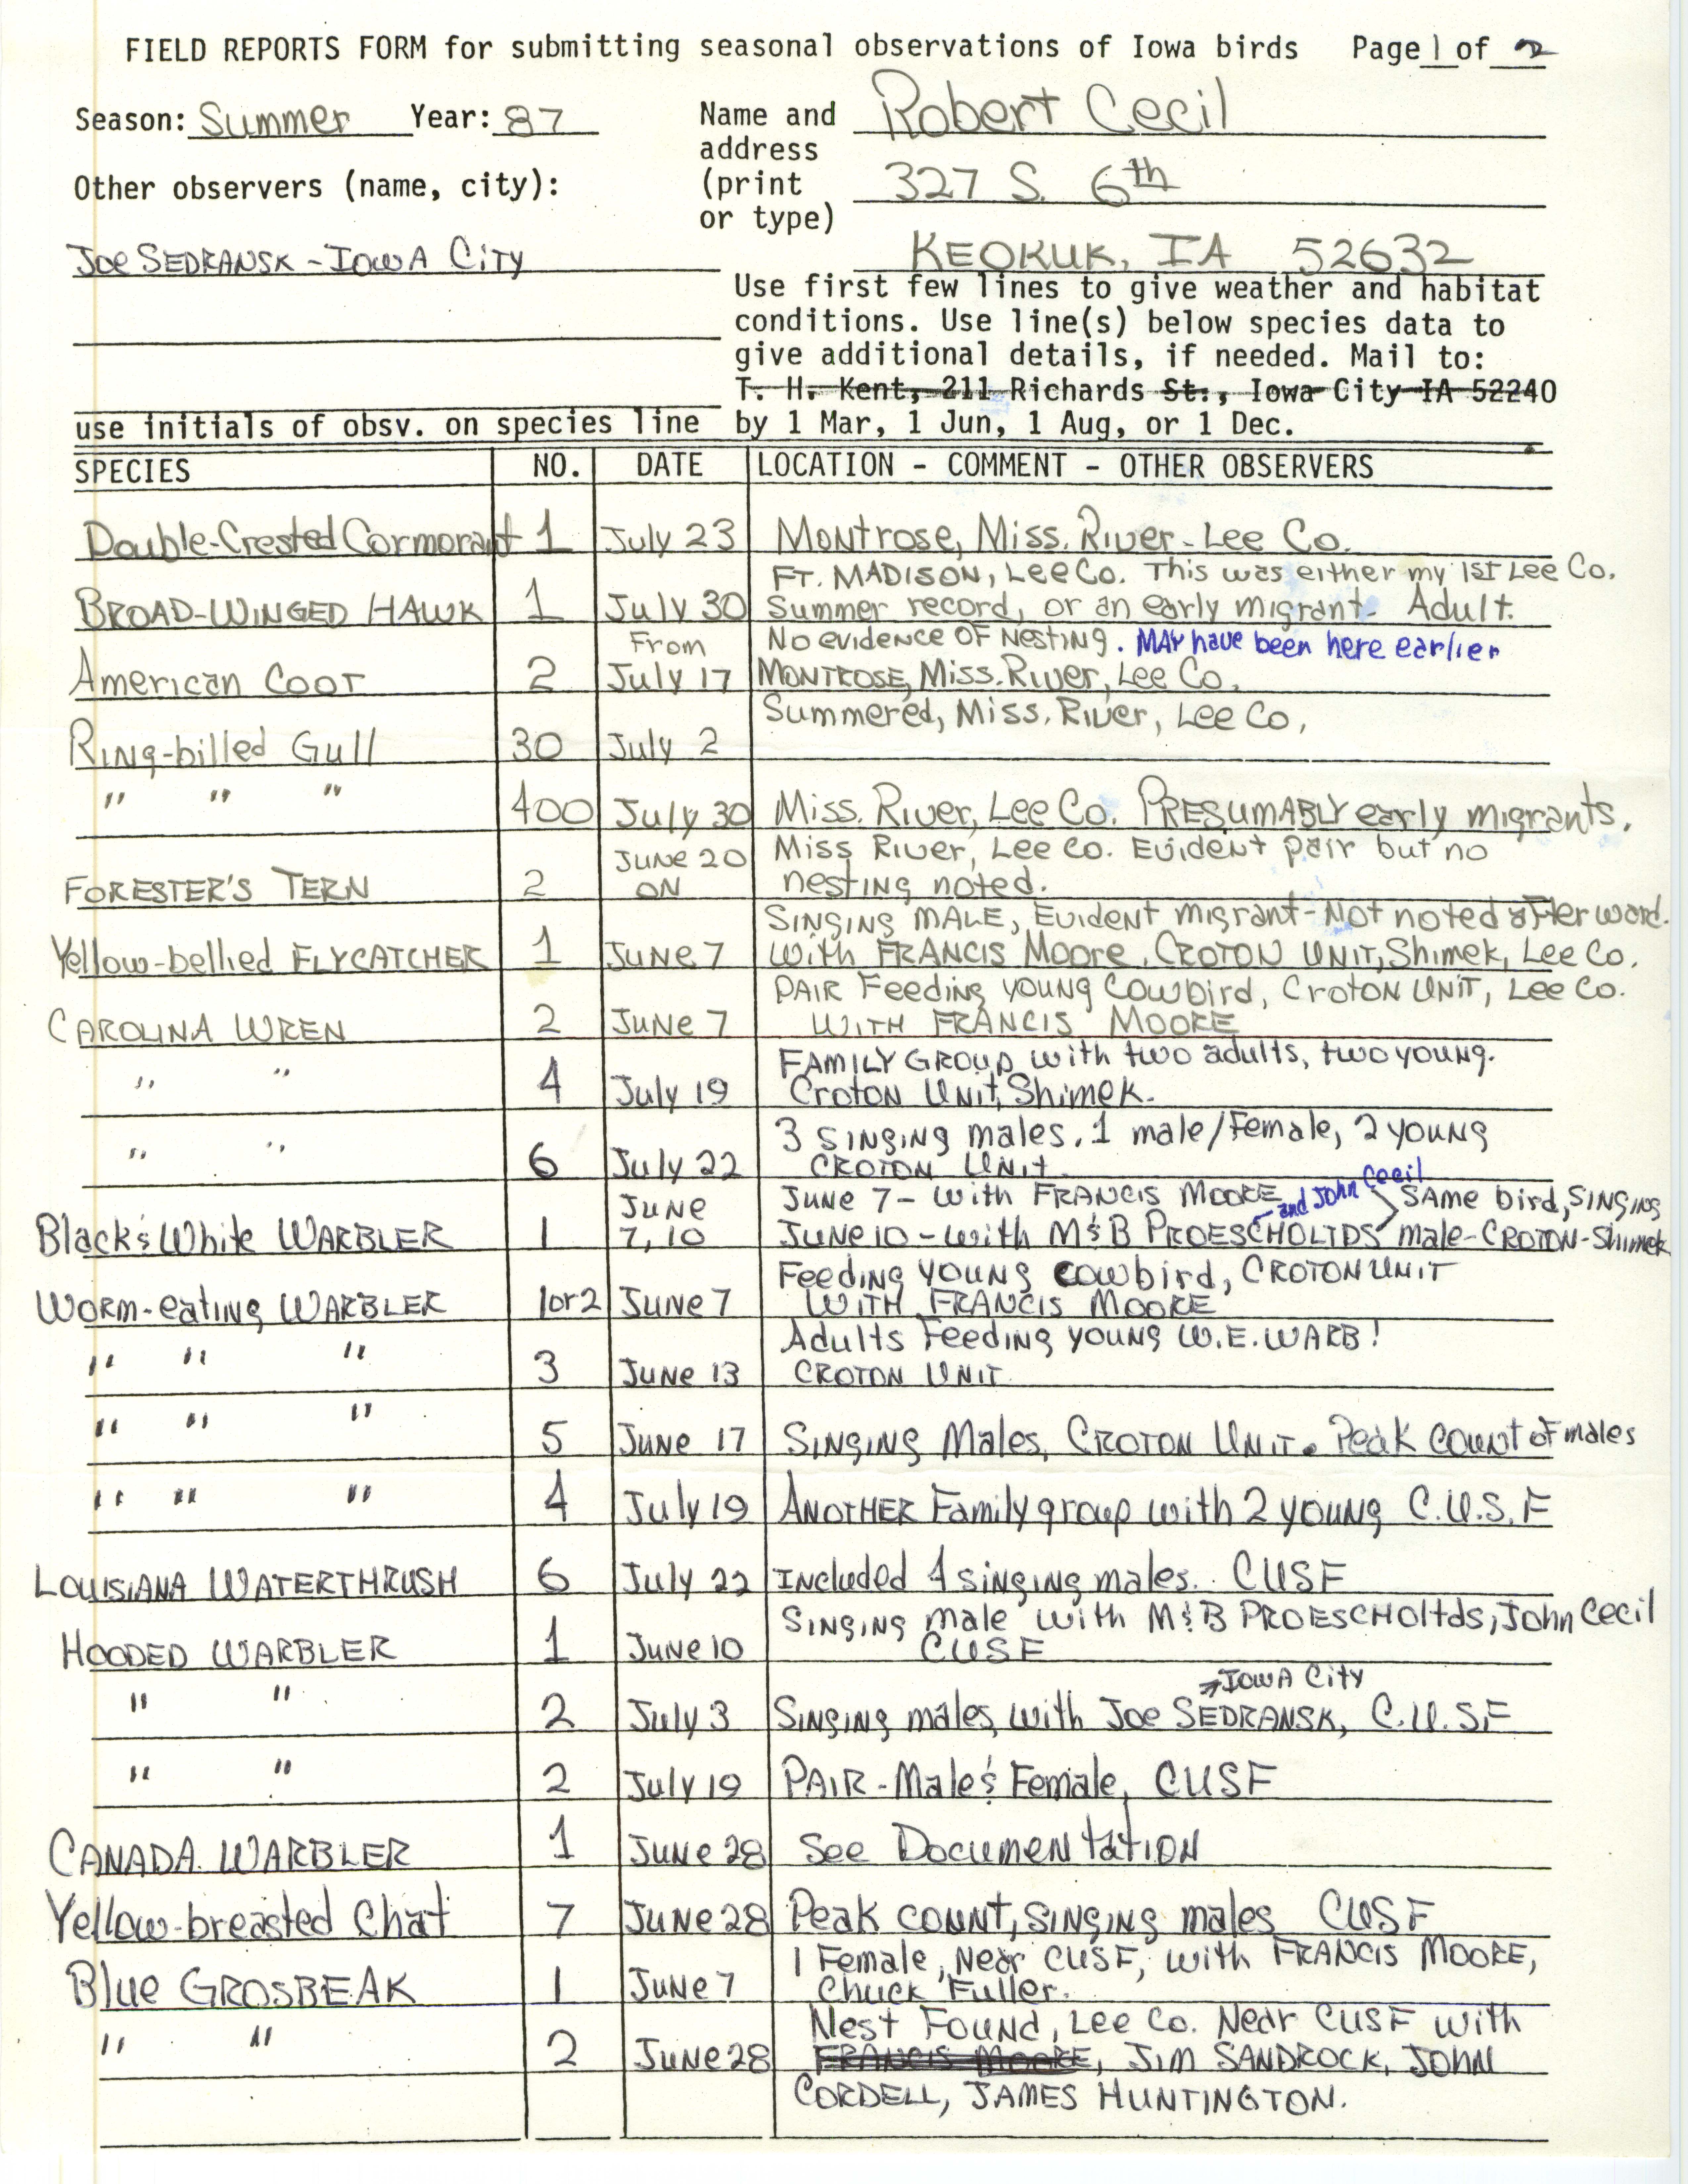 Field reports form for submitting seasonal observations of Iowa birds, Robert I. Cecil, summer 1987